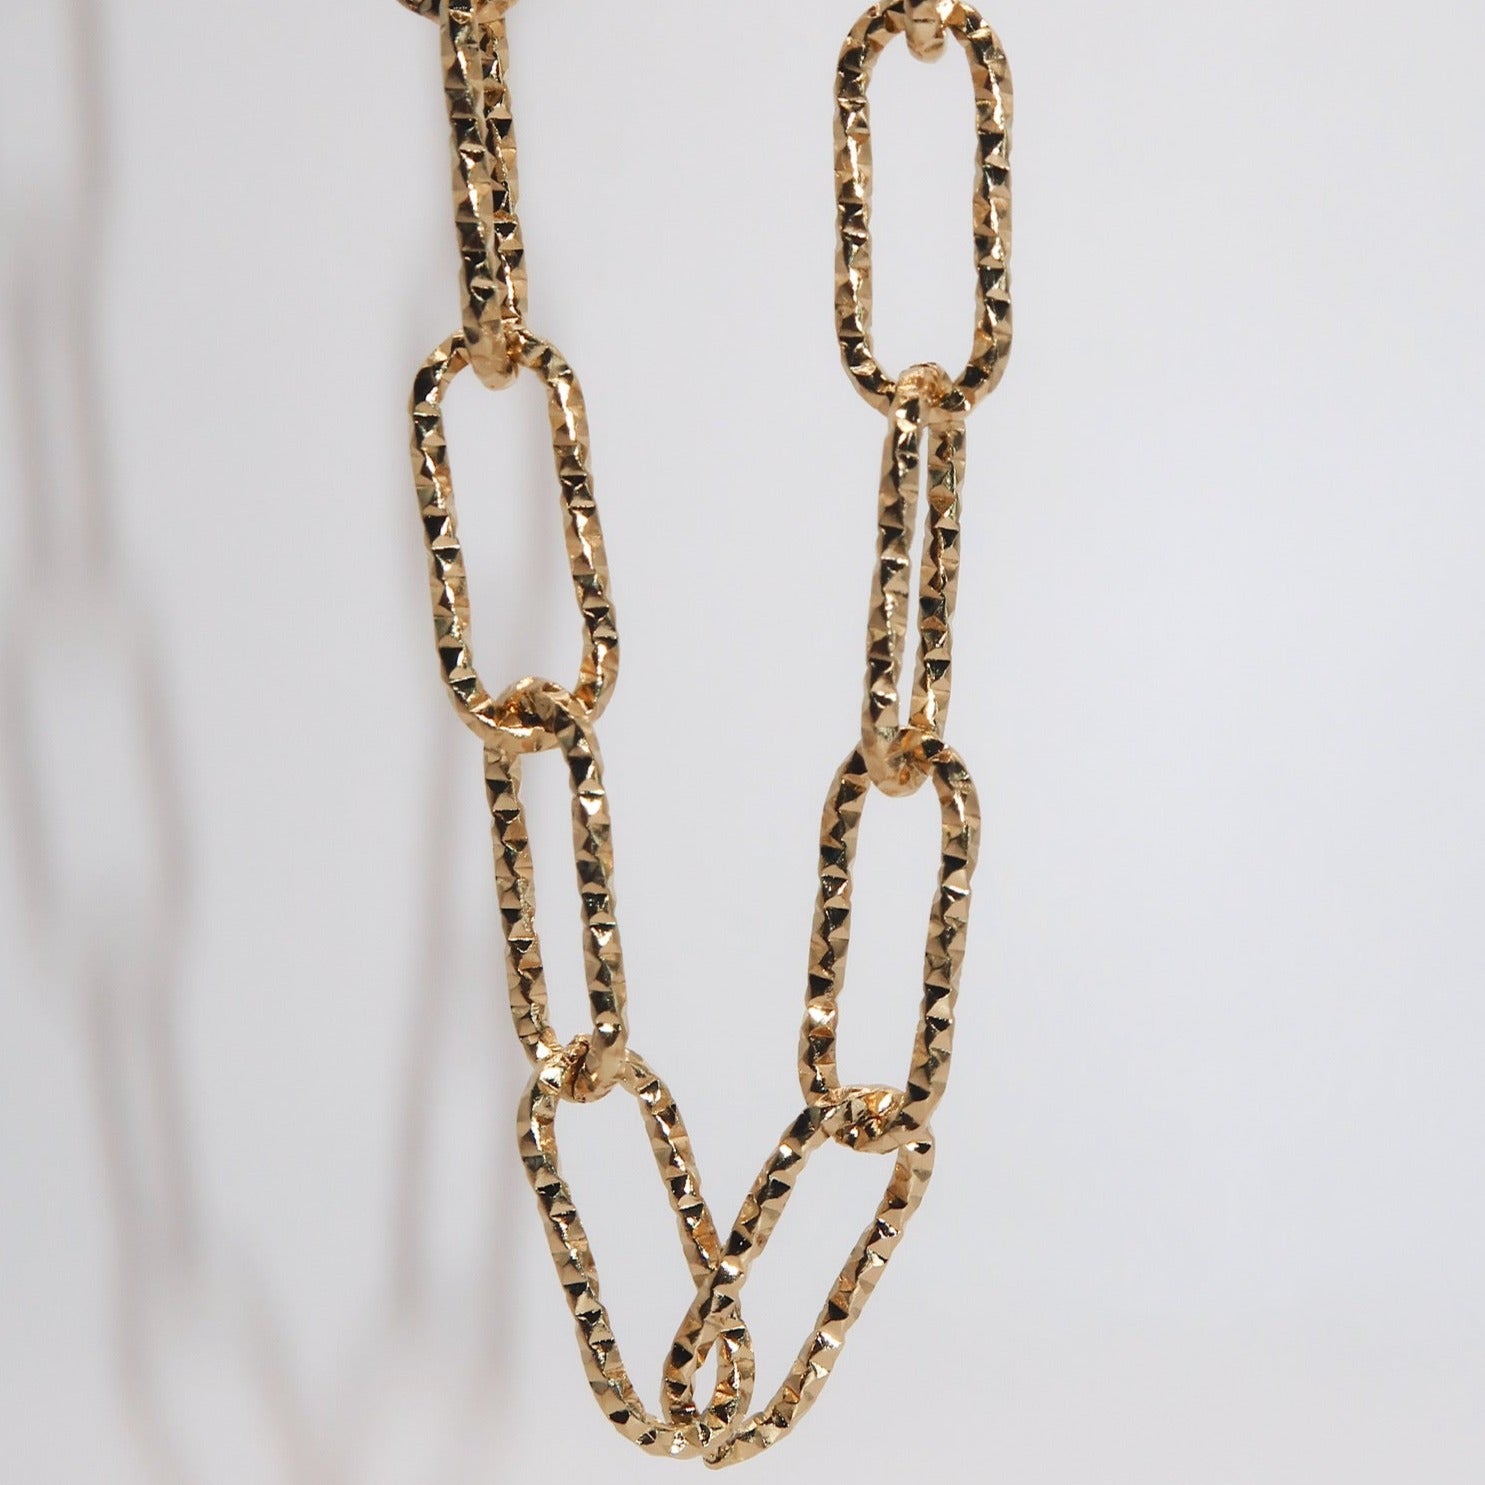 FABIANA - 18K PVD Gold Plated Textured Link Necklace - Mixed Metals